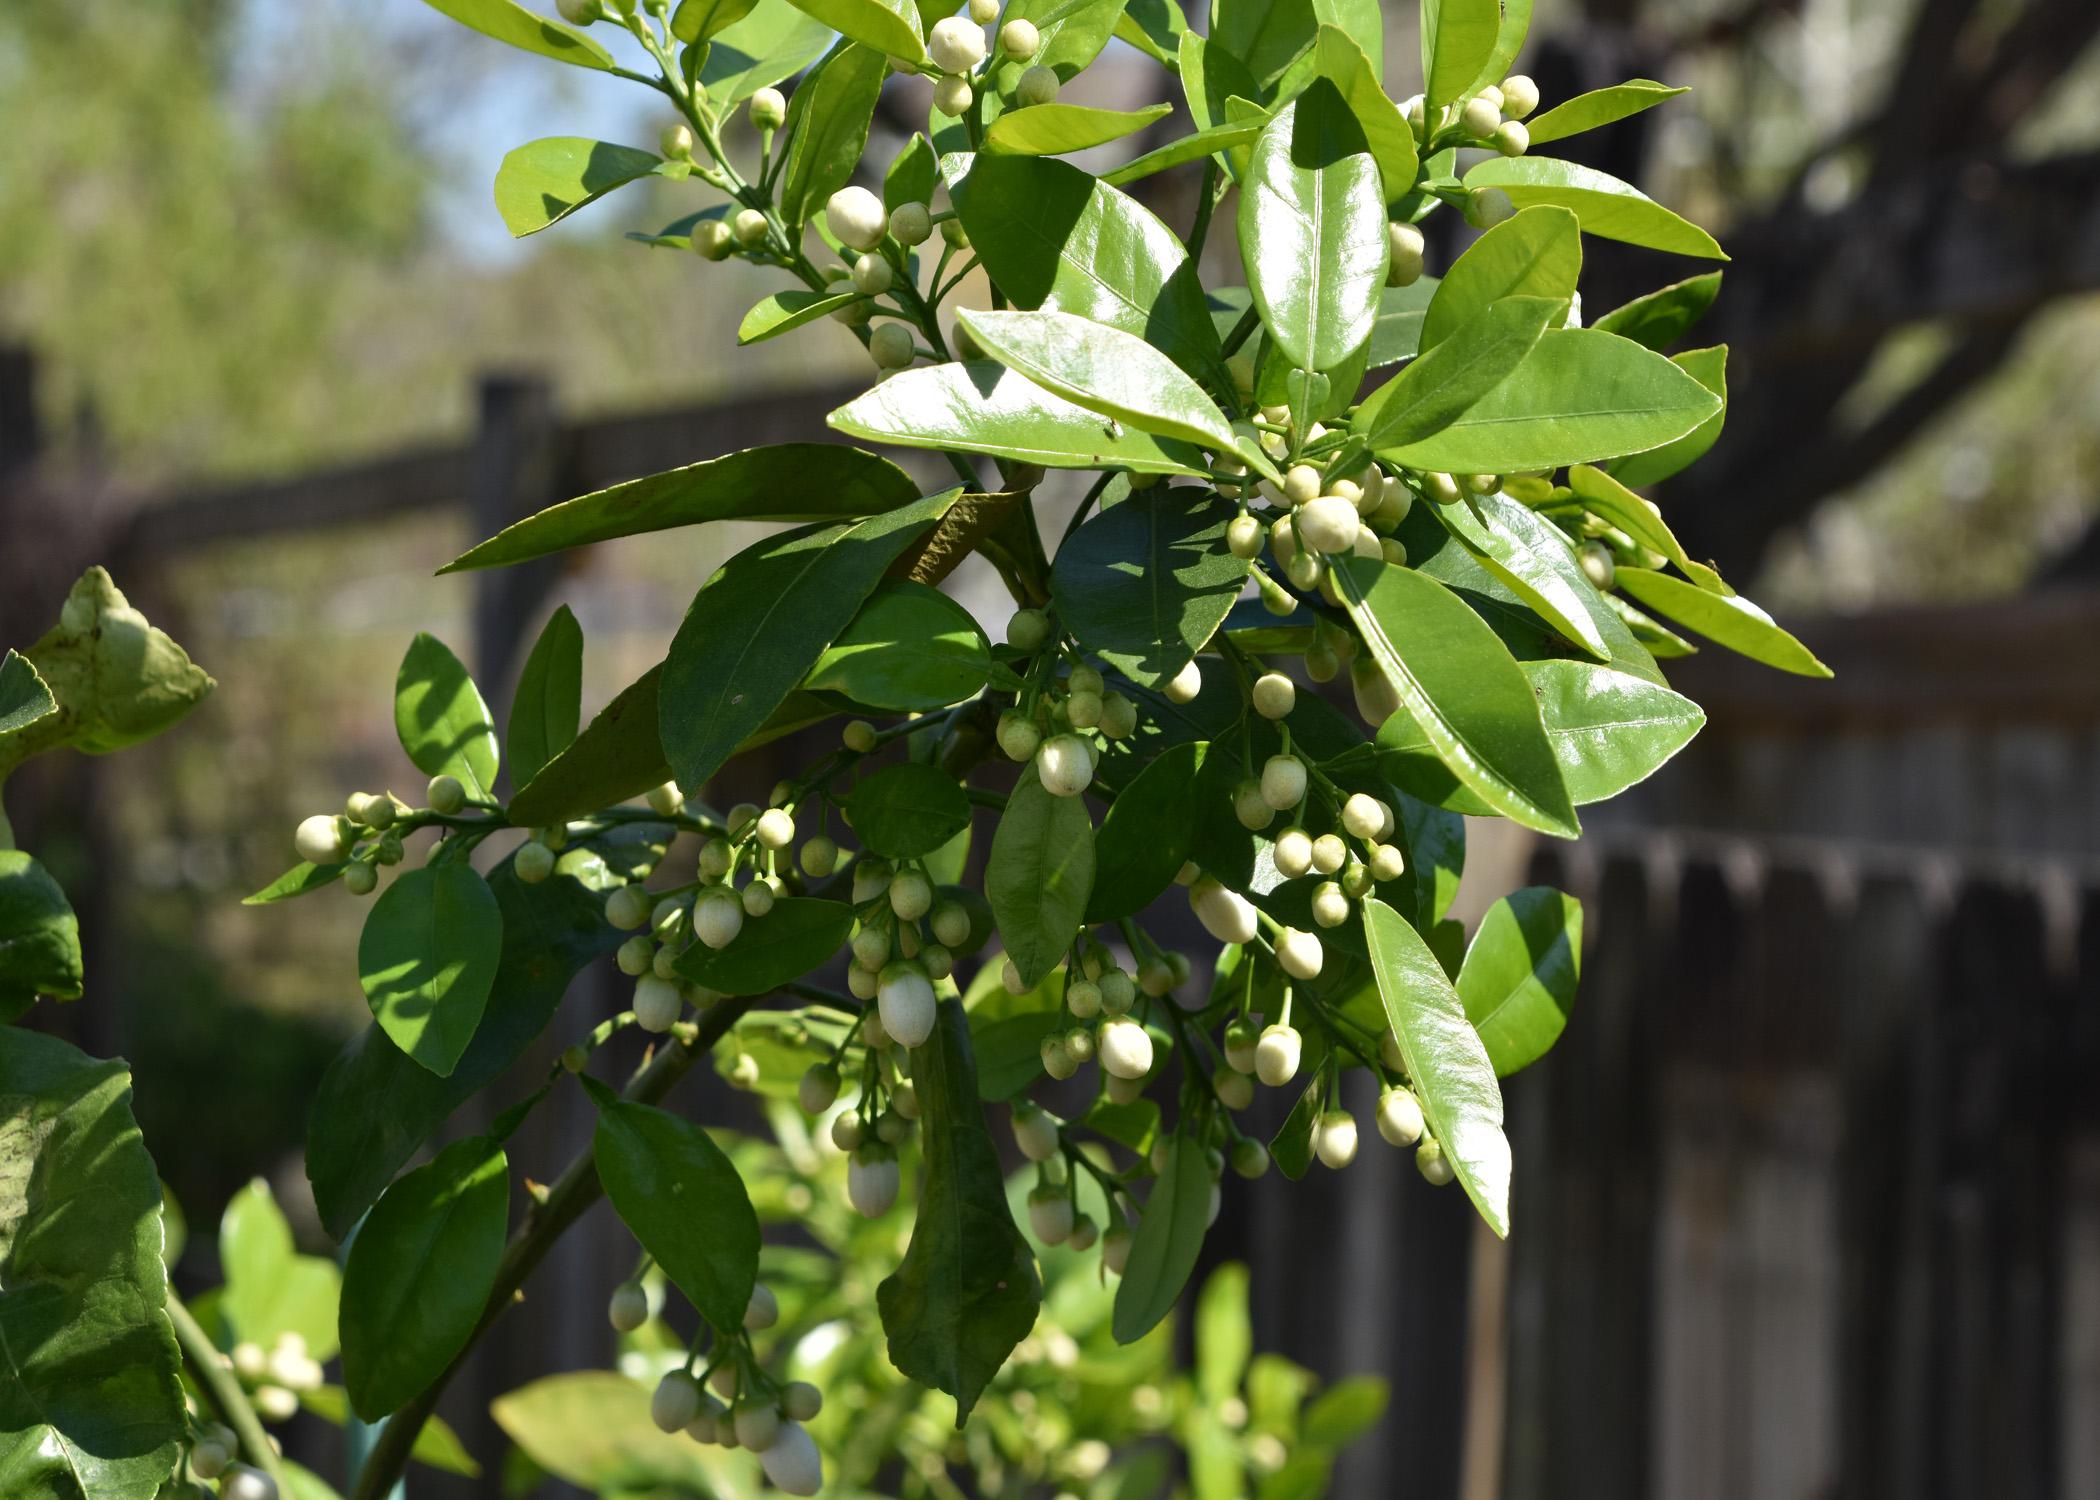 A branch is loaded with flower buds.